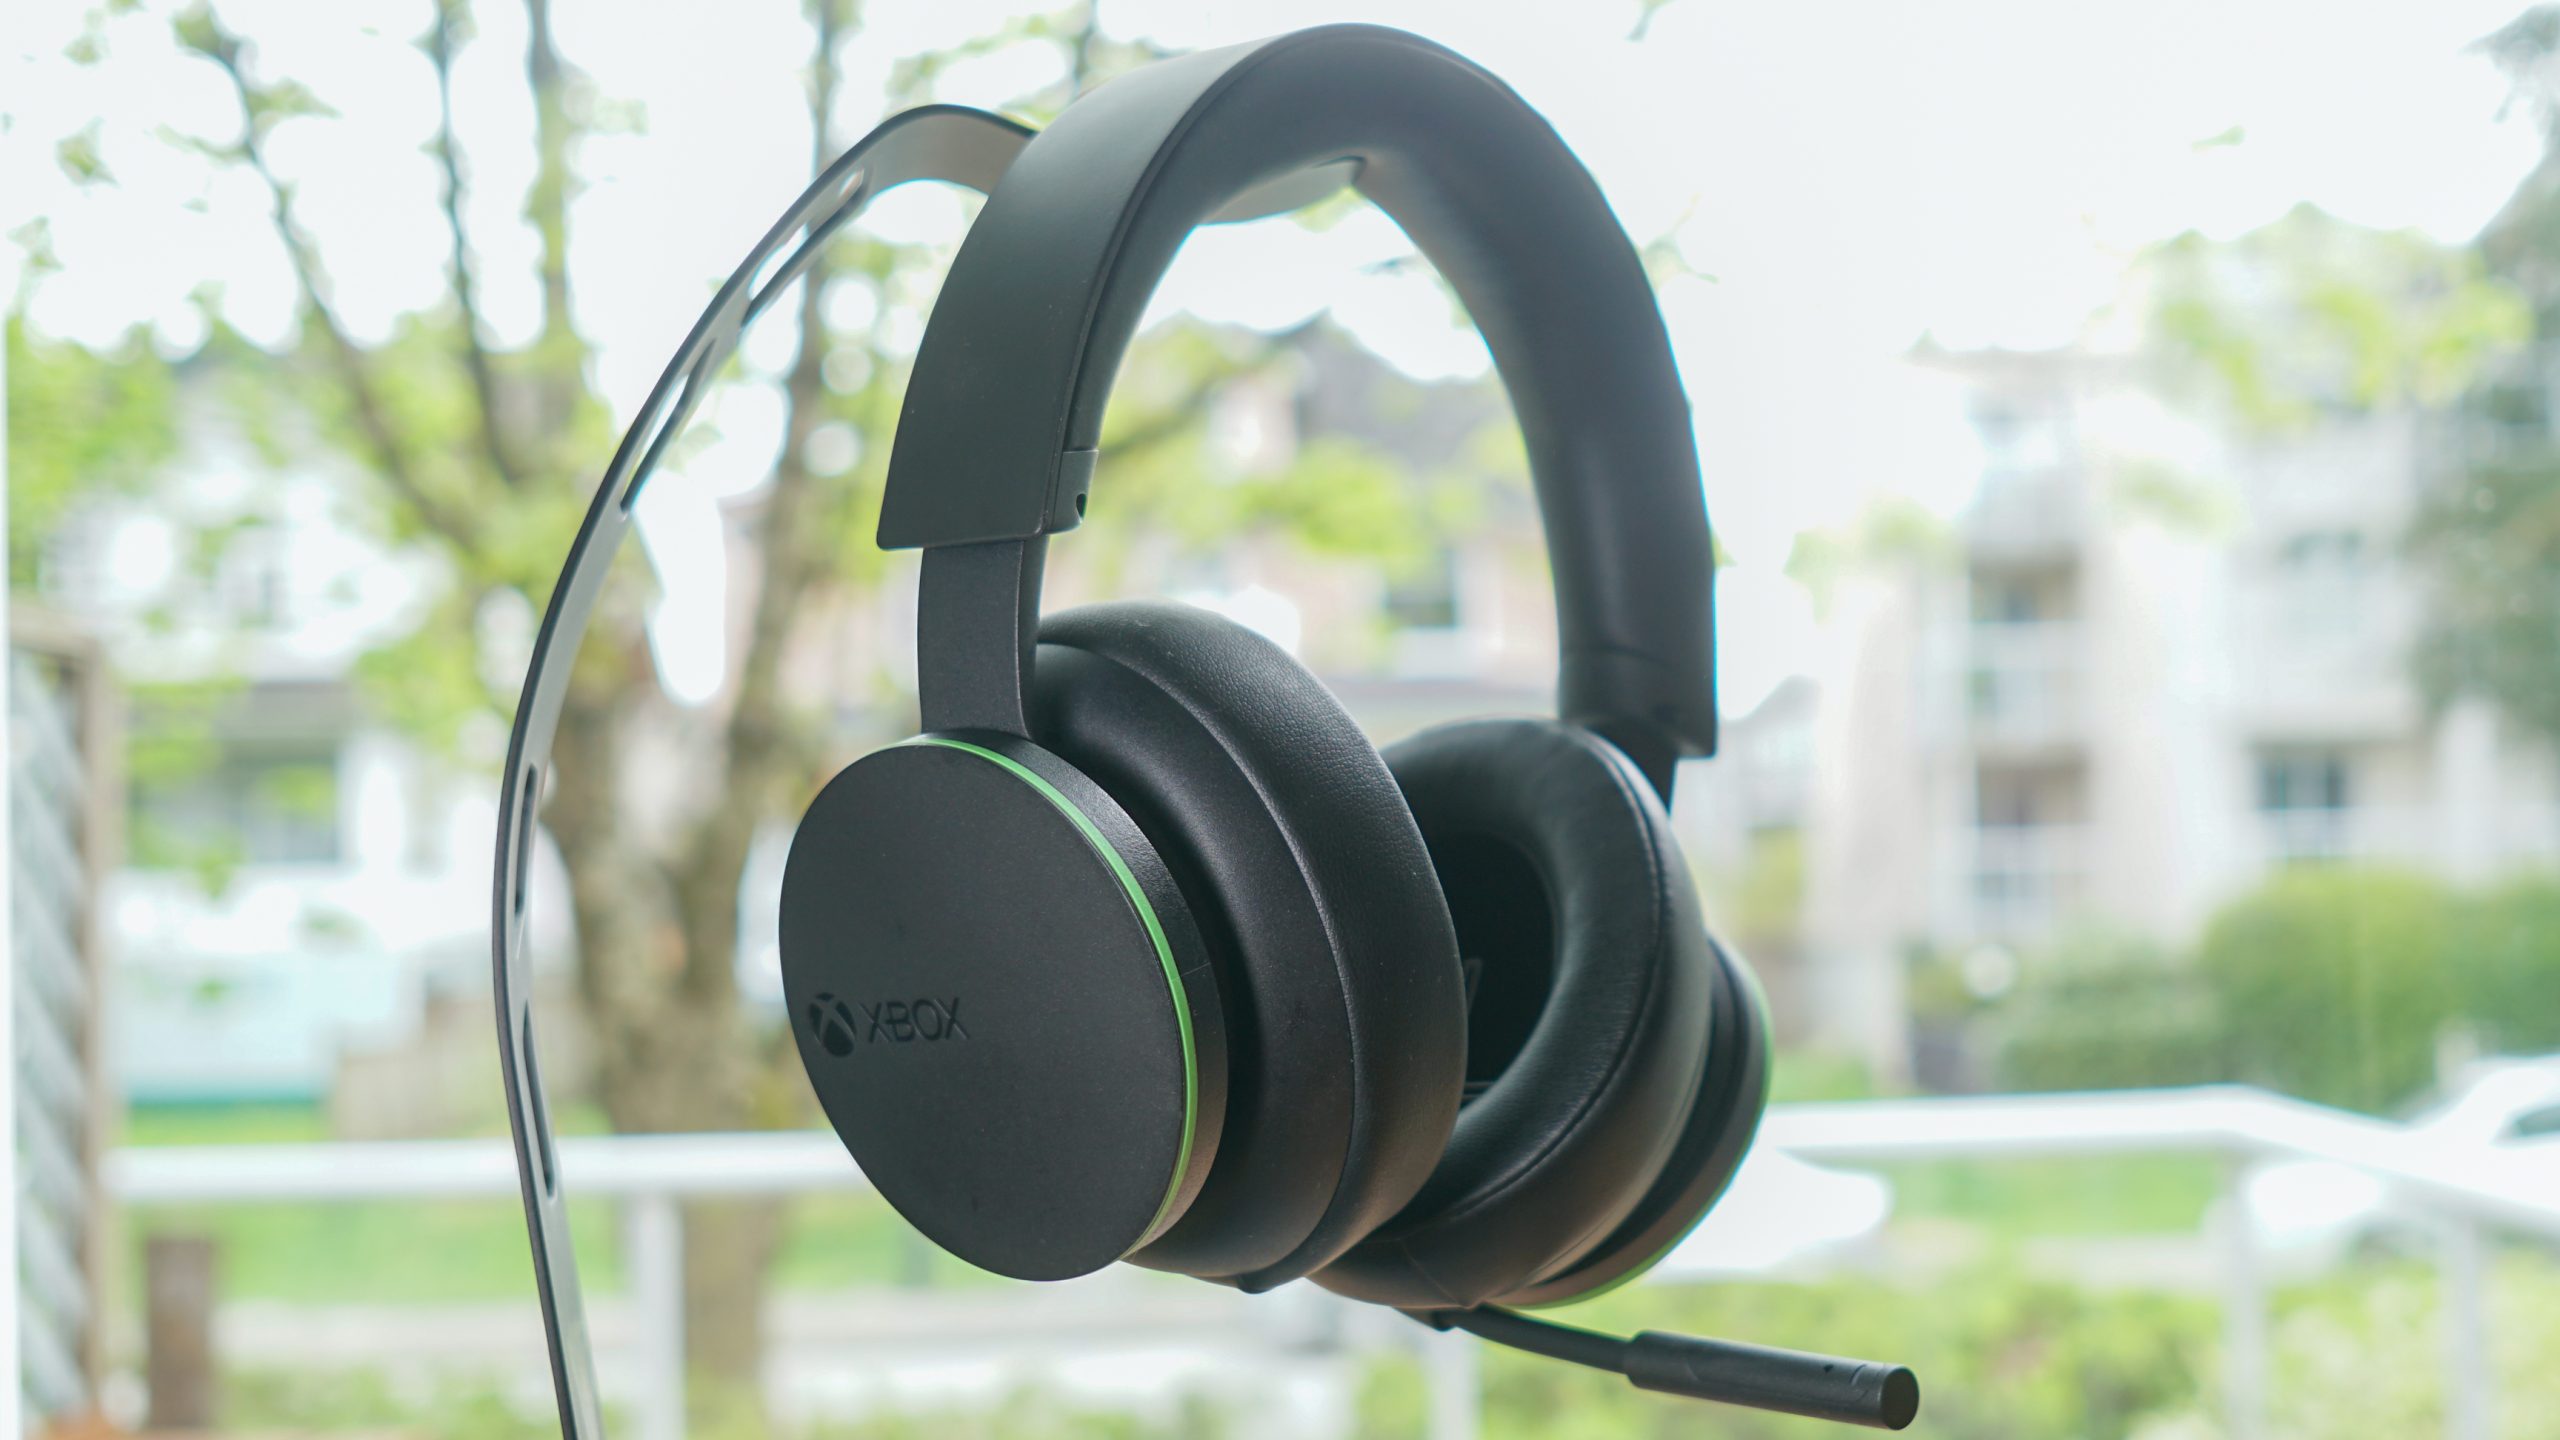 The best wireless gaming headsets for Xbox One - SoundGuys